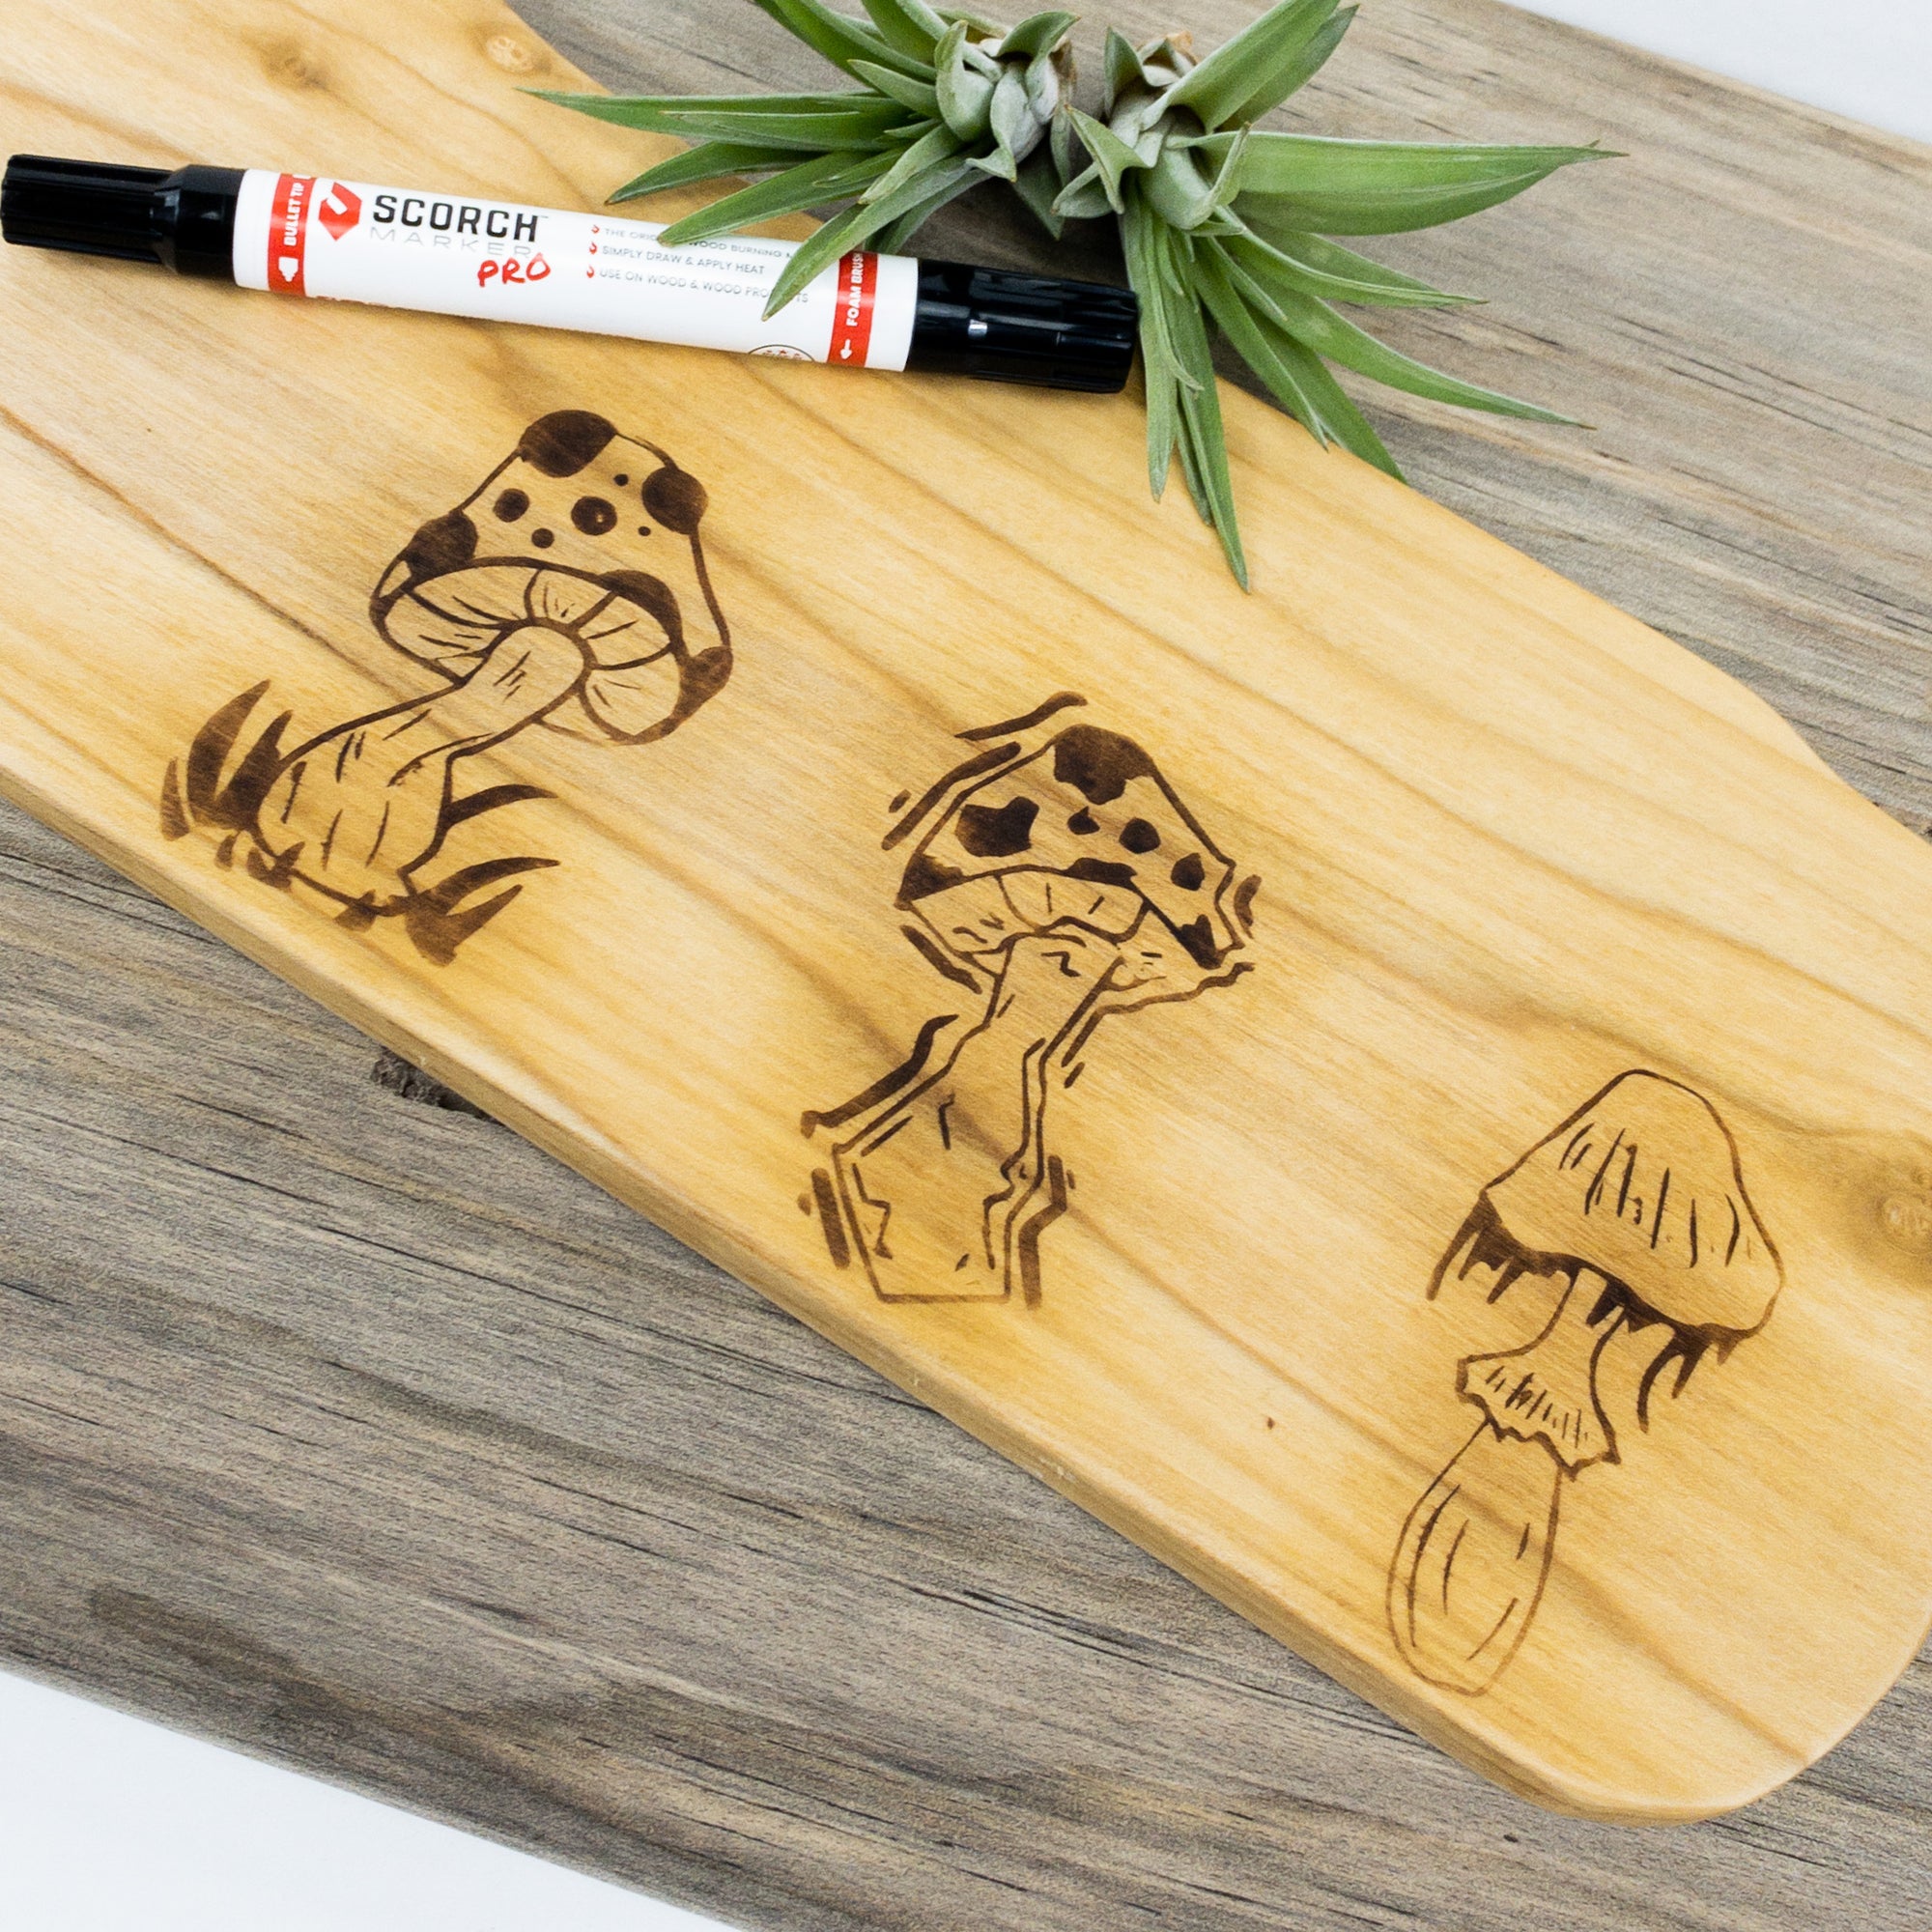 Easy wood burning projects  step by step DIY pyrography blog Tagged  Stencils - Scorch Marker